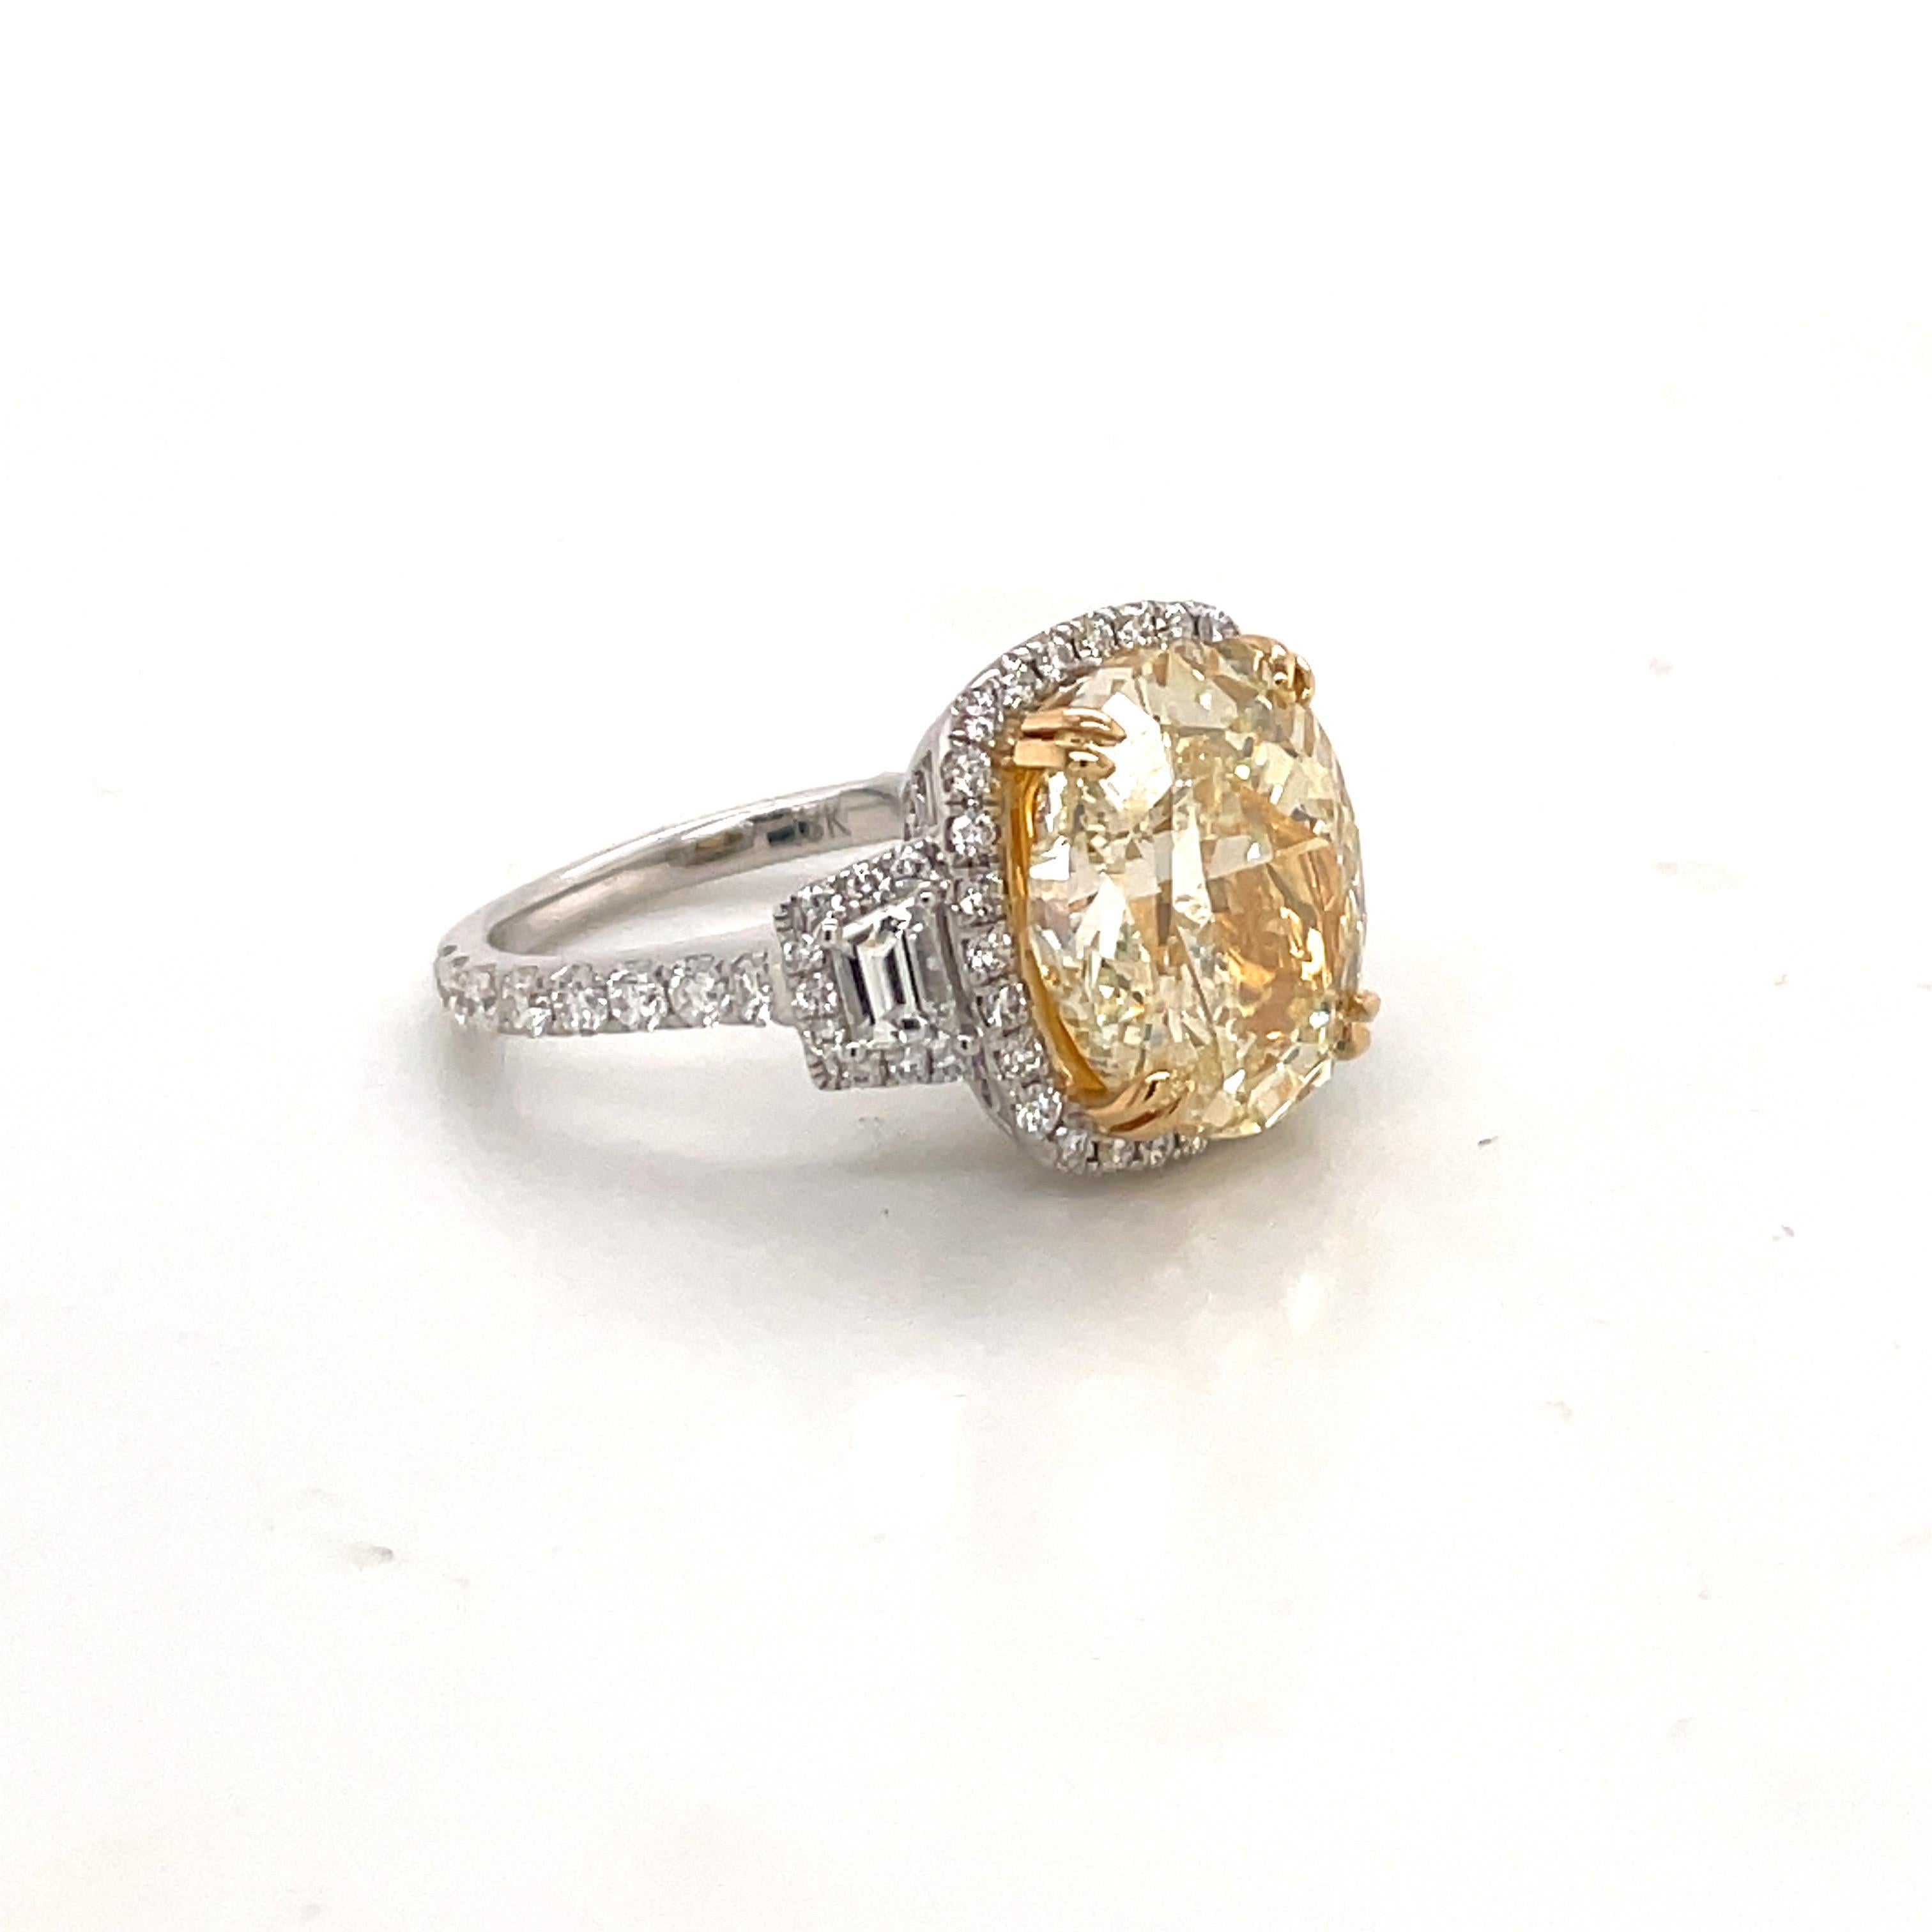 Contemporary GIA Certified Oval Cut Fancy Light Yellow Diamond Engagement Ring 7.16 Carats VS